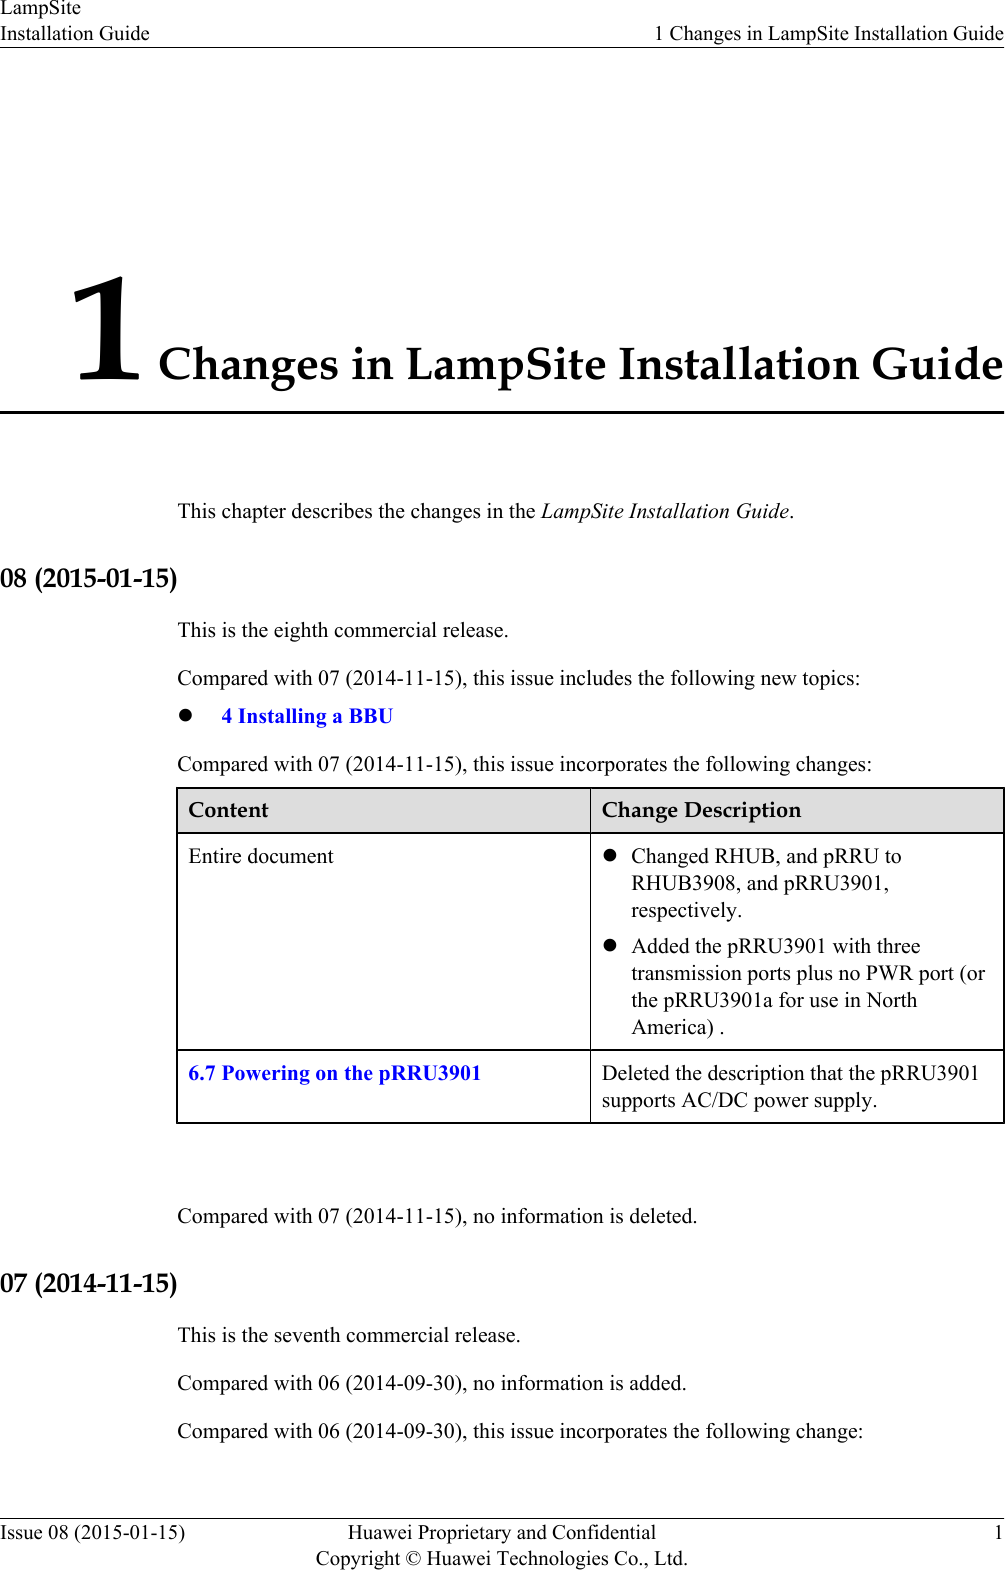 1 Changes in LampSite Installation GuideThis chapter describes the changes in the LampSite Installation Guide.08 (2015-01-15)This is the eighth commercial release.Compared with 07 (2014-11-15), this issue includes the following new topics:l4 Installing a BBUCompared with 07 (2014-11-15), this issue incorporates the following changes:Content Change DescriptionEntire document lChanged RHUB, and pRRU toRHUB3908, and pRRU3901,respectively.lAdded the pRRU3901 with threetransmission ports plus no PWR port (orthe pRRU3901a for use in NorthAmerica) .6.7 Powering on the pRRU3901 Deleted the description that the pRRU3901supports AC/DC power supply. Compared with 07 (2014-11-15), no information is deleted.07 (2014-11-15)This is the seventh commercial release.Compared with 06 (2014-09-30), no information is added.Compared with 06 (2014-09-30), this issue incorporates the following change:LampSiteInstallation Guide 1 Changes in LampSite Installation GuideIssue 08 (2015-01-15) Huawei Proprietary and ConfidentialCopyright © Huawei Technologies Co., Ltd.1